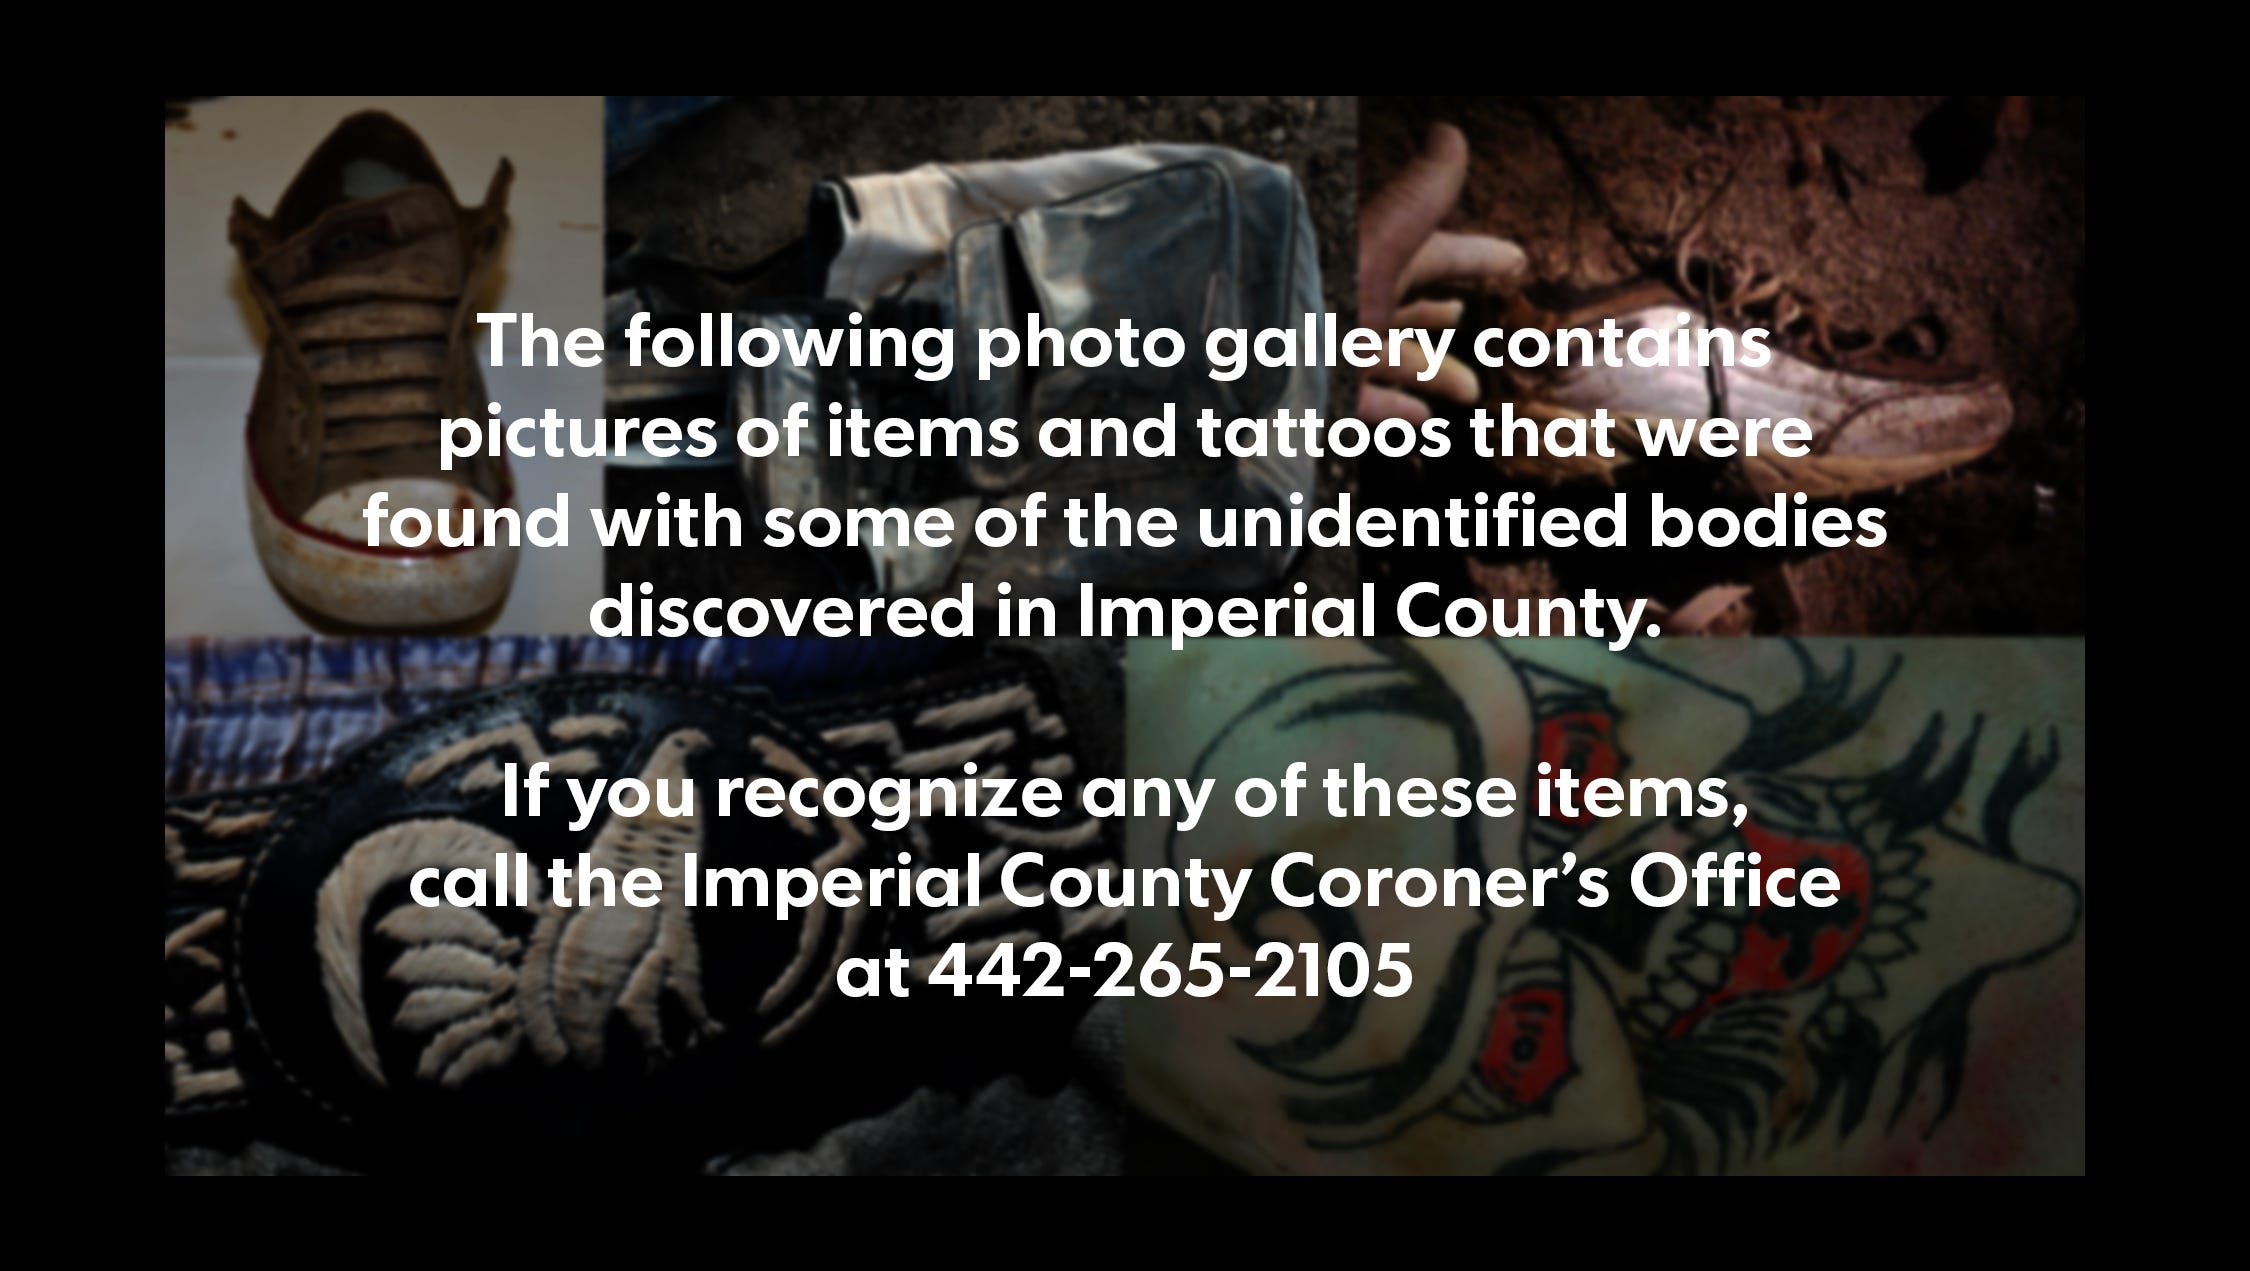 The following photo gallery contains pictures of items and tattoos that were found with some of the unidentified bodies discovered in Imperial County.
If you recognize any of these items, call the Imperial County Coroner's Office at 442-265-2105.